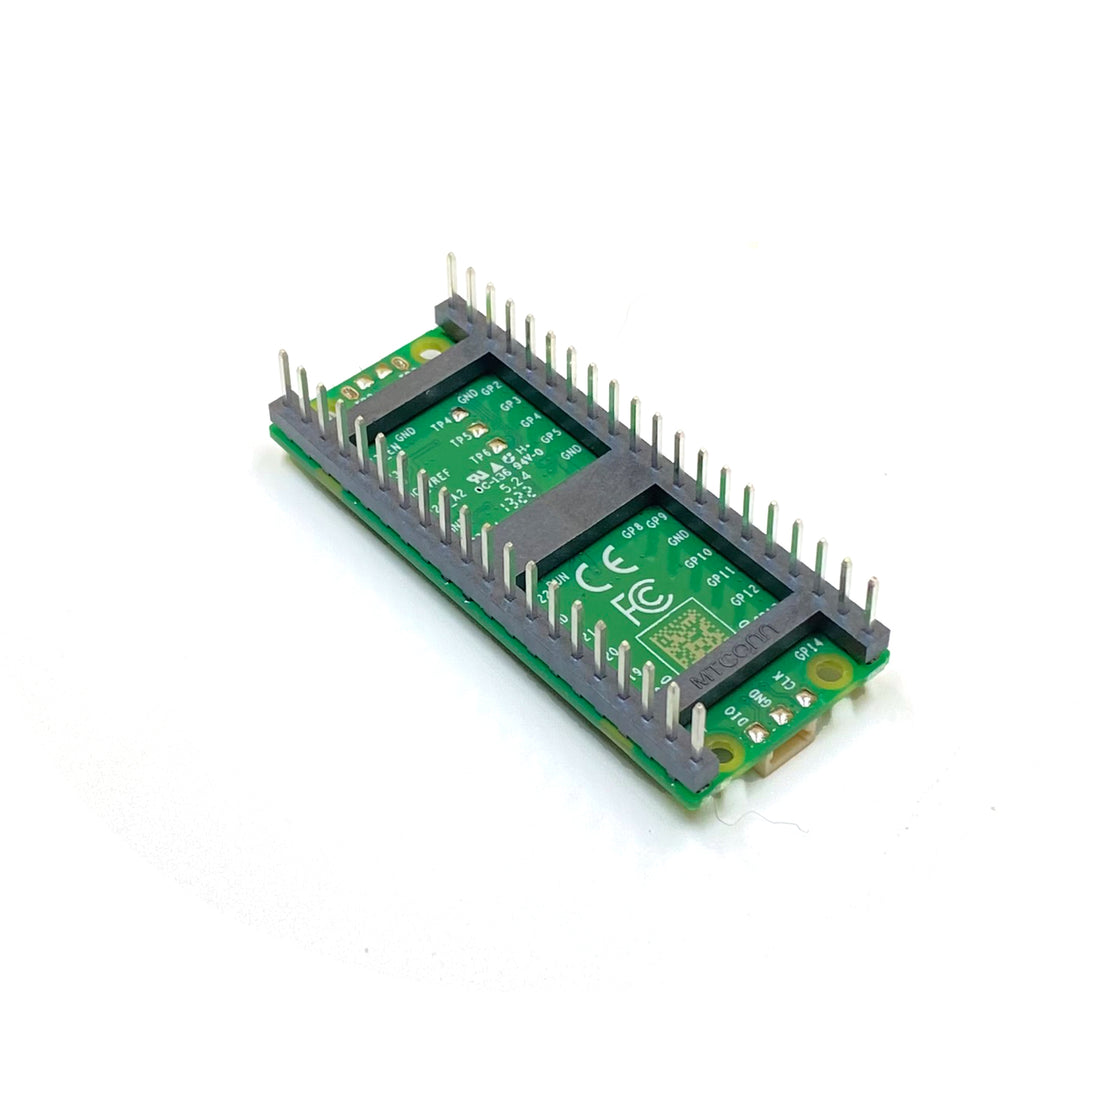 PepperTech Digital Raspberry Pi Pico-H (Pre-soldered Headers) Kit with Micro-USB to USB Cable